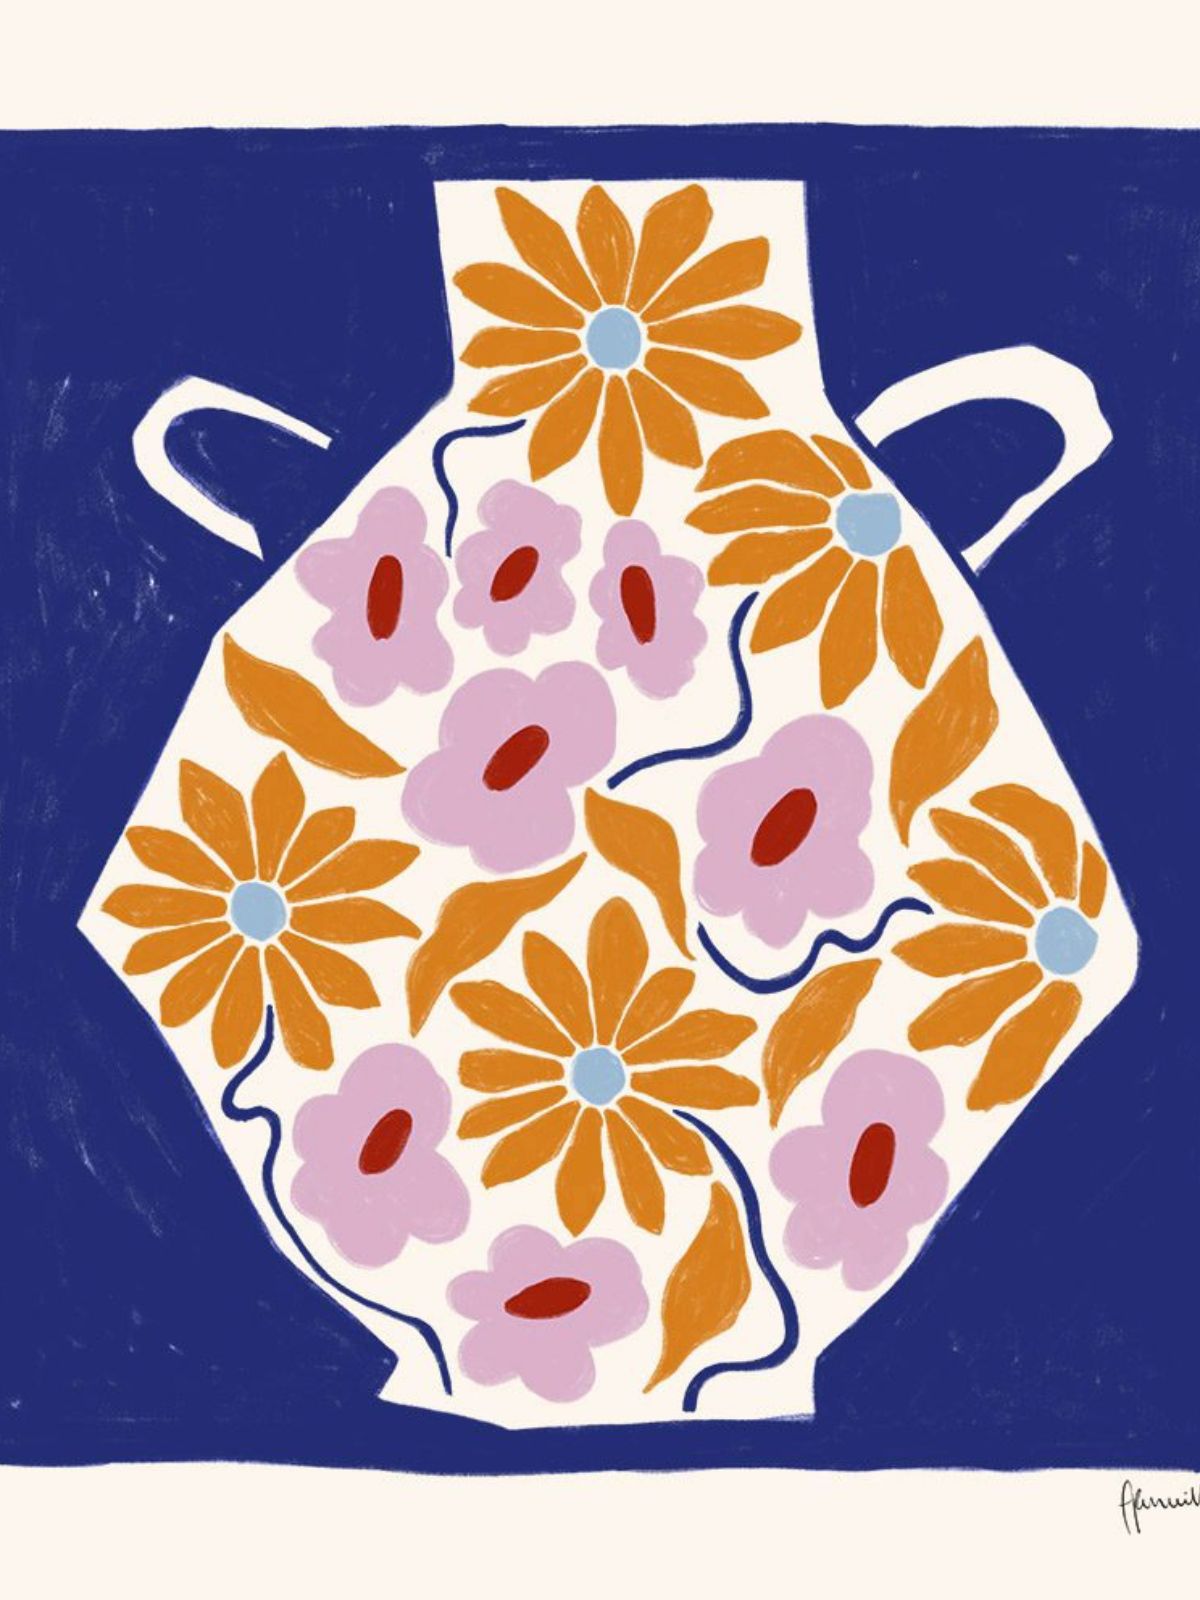 Poster Sunflower Vase by Frankie Penwill-4